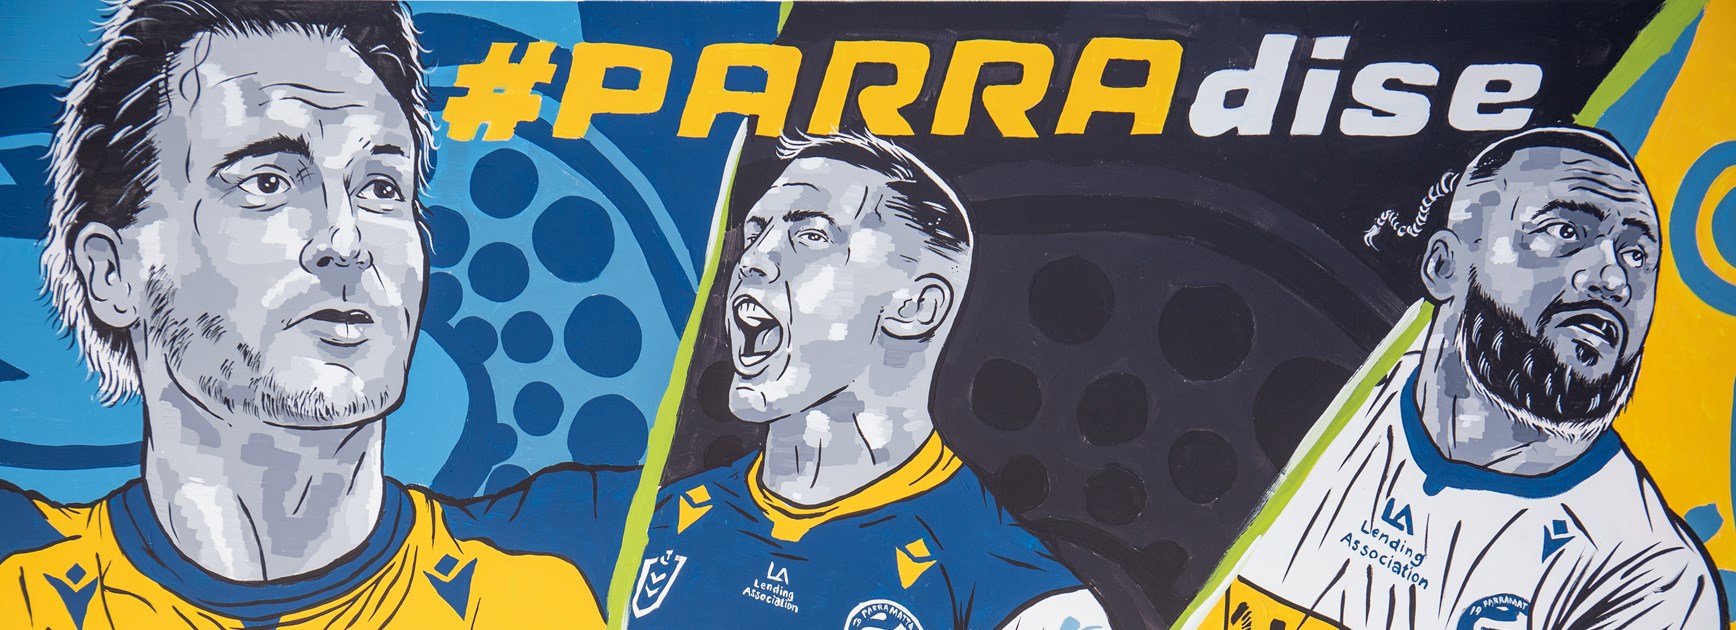 Eels 2021 jersey reveal and unveiling of CBD mural in celebration of new corporate partnerships